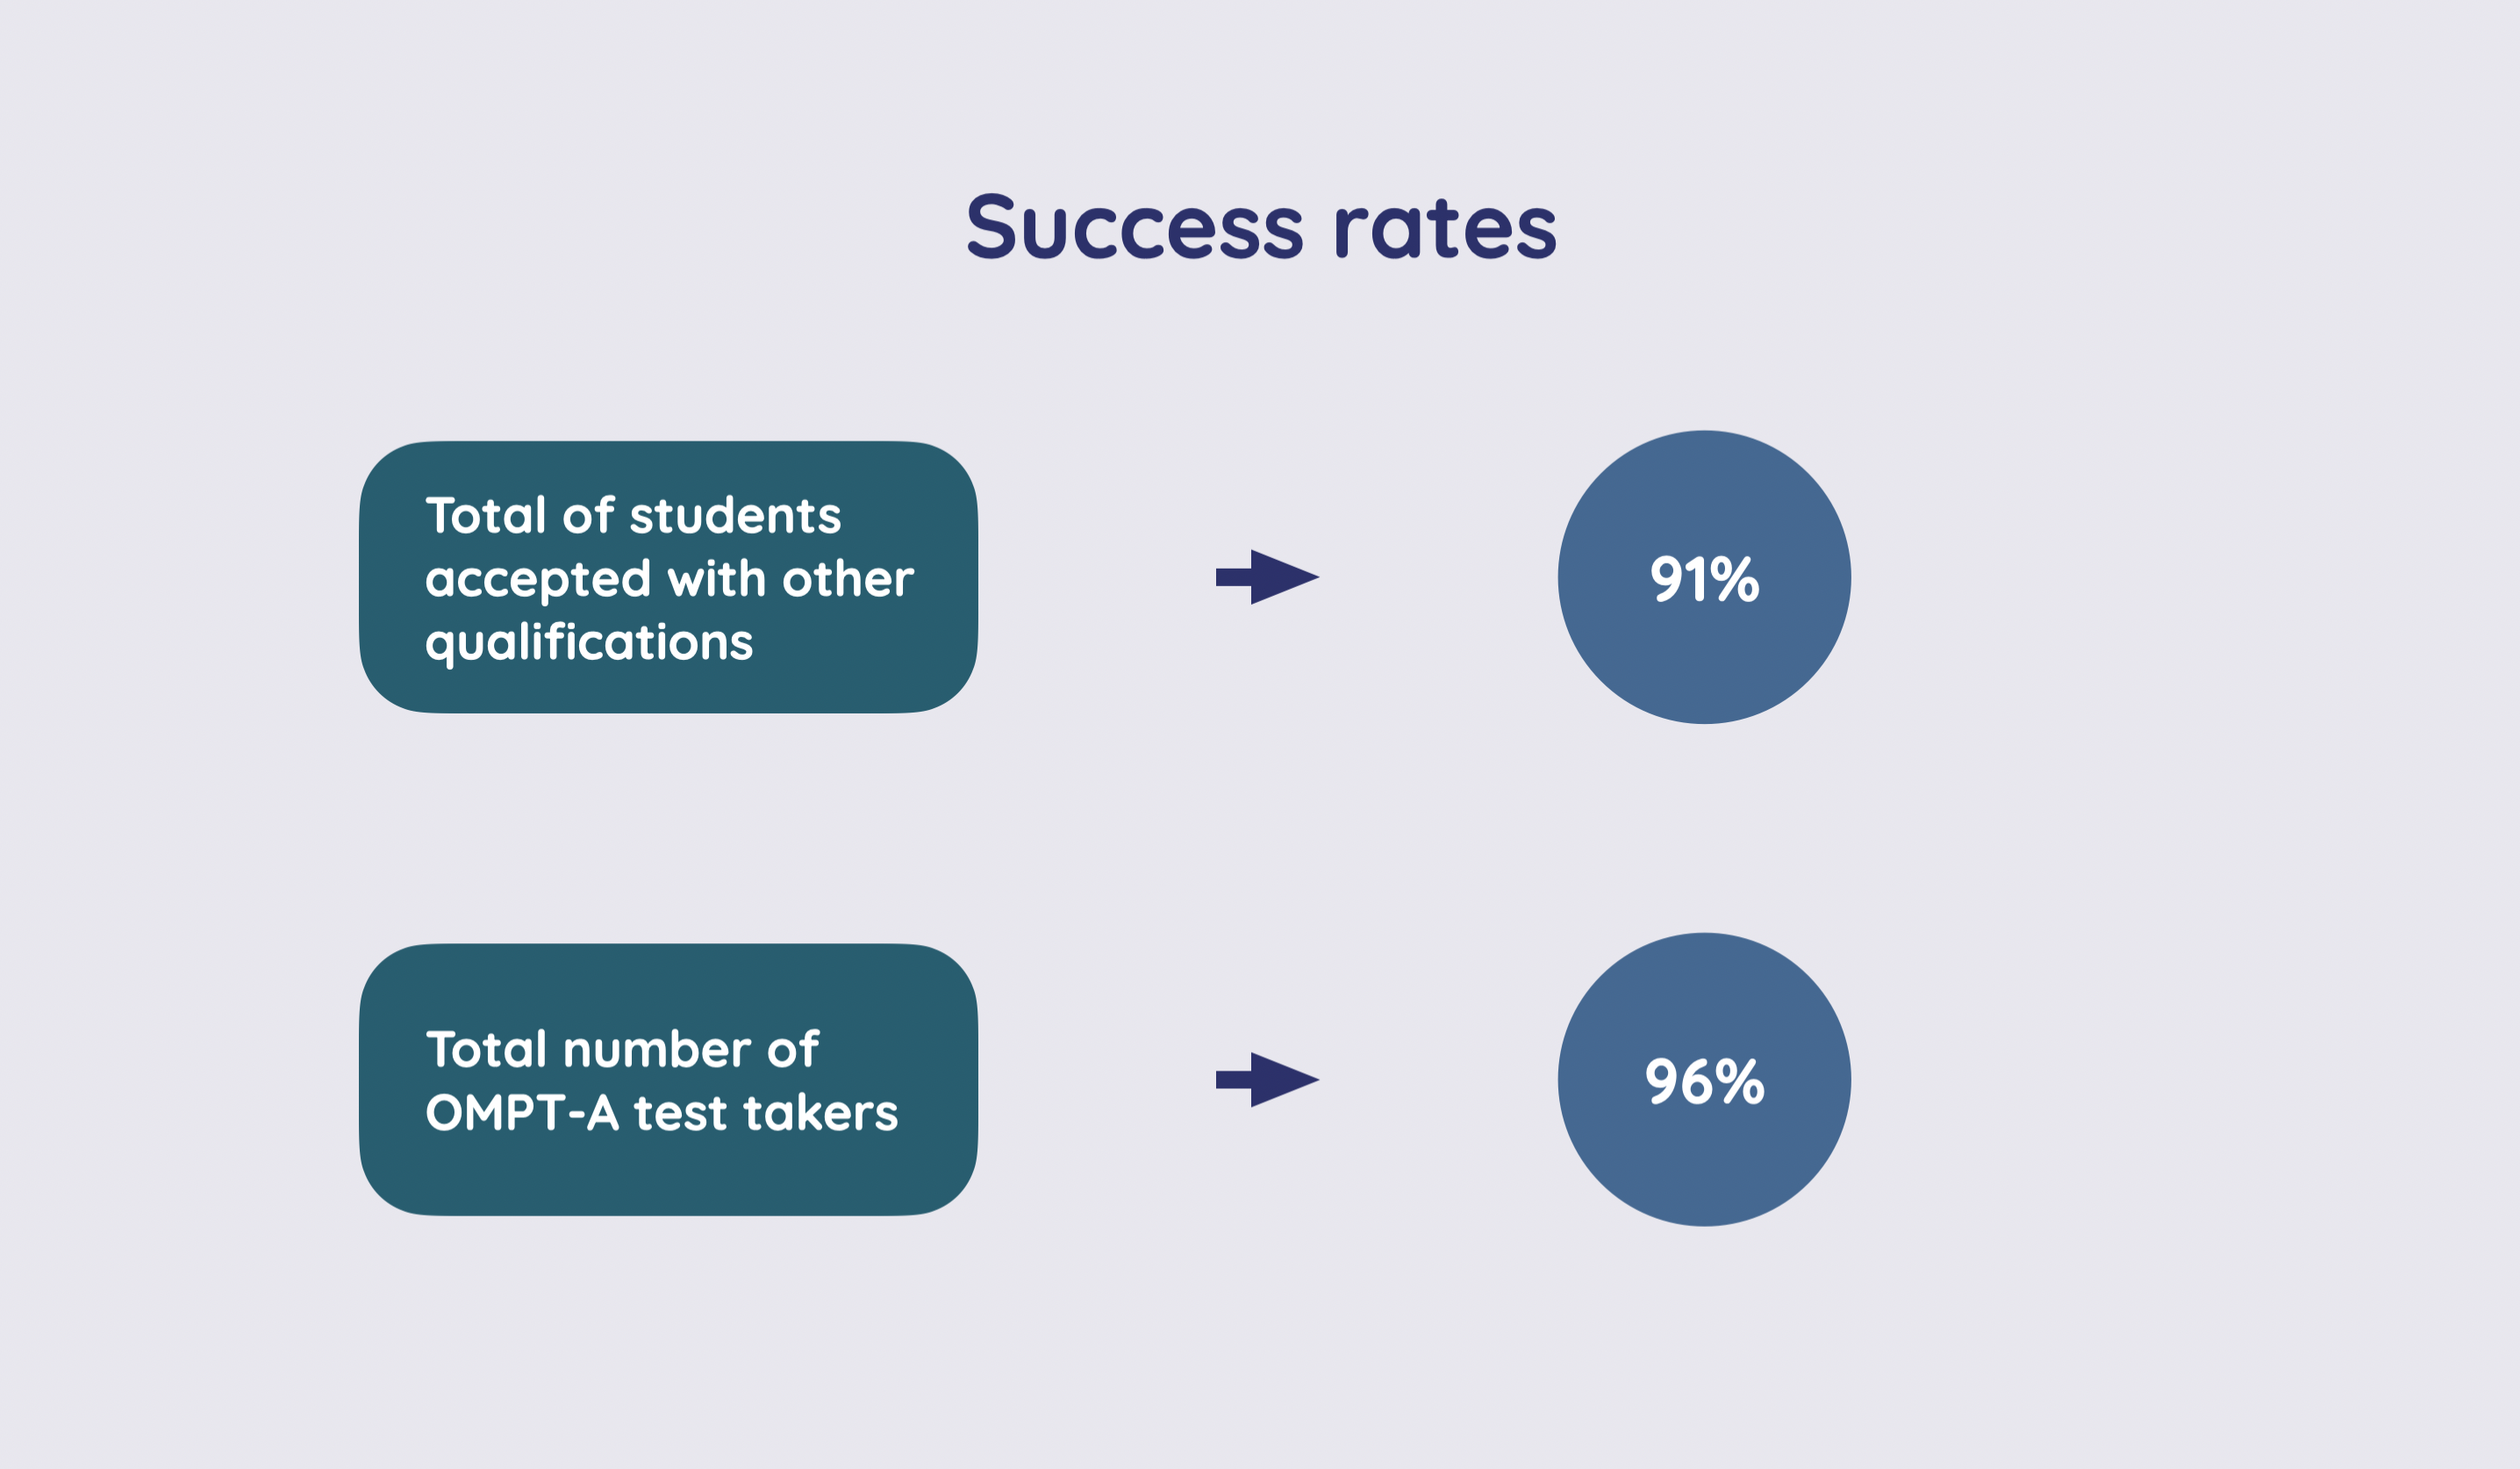 Figure that compares success rates of OMPT-A test-takers and non-test-takers, 2021.